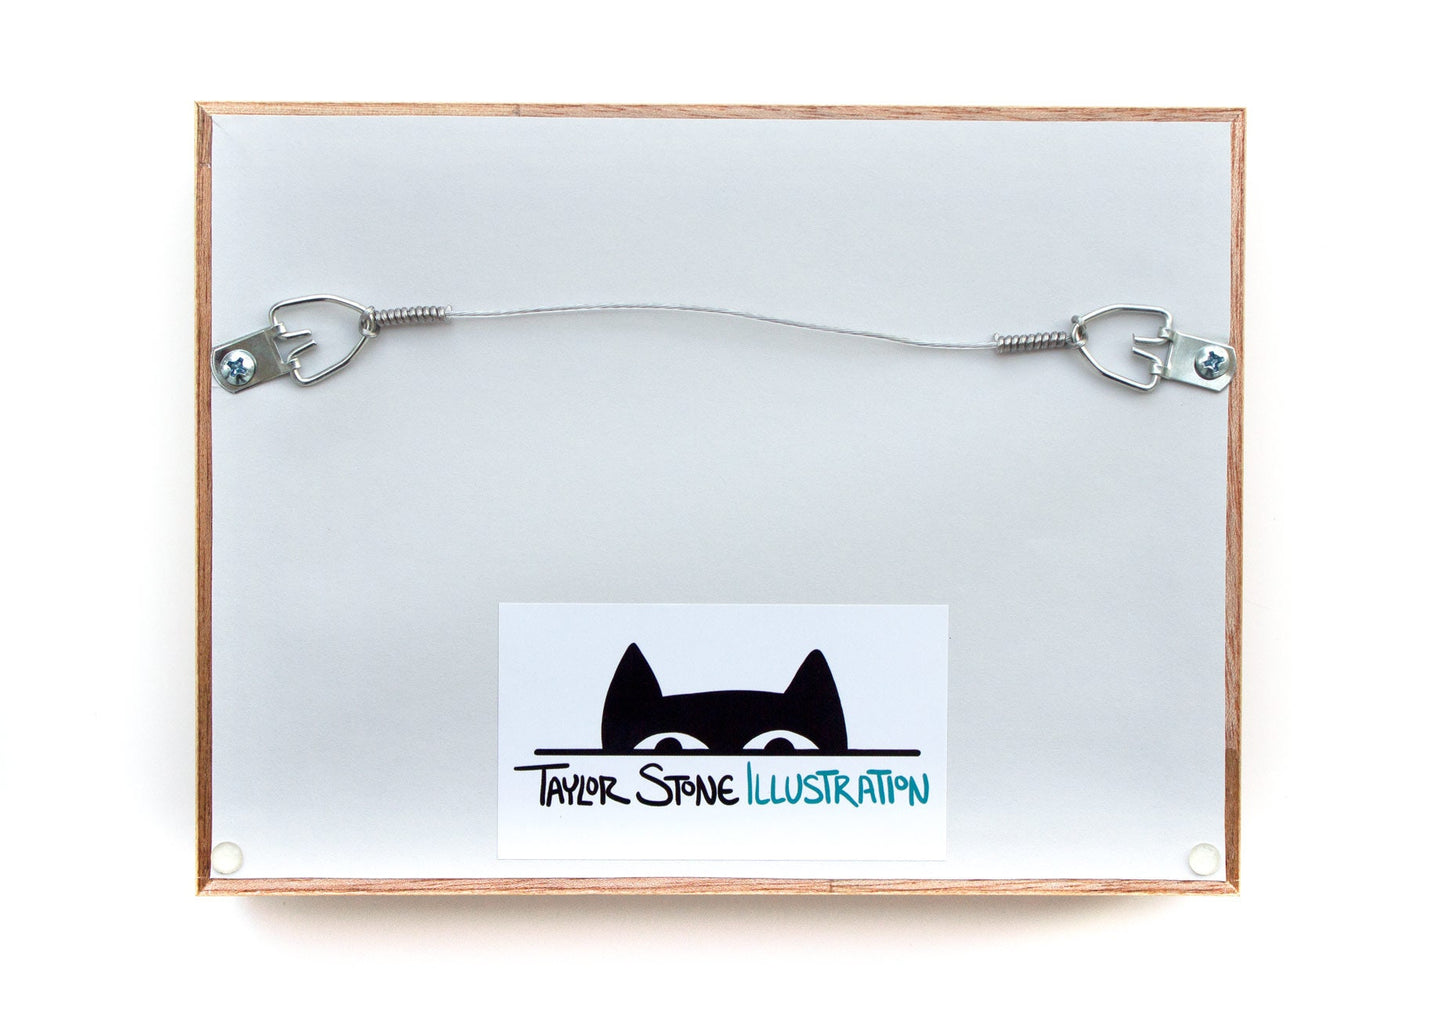 Back of Taylor Stone Illustration frame for cut paper illustrations with cat logo and horizontal wire hook for hanging.